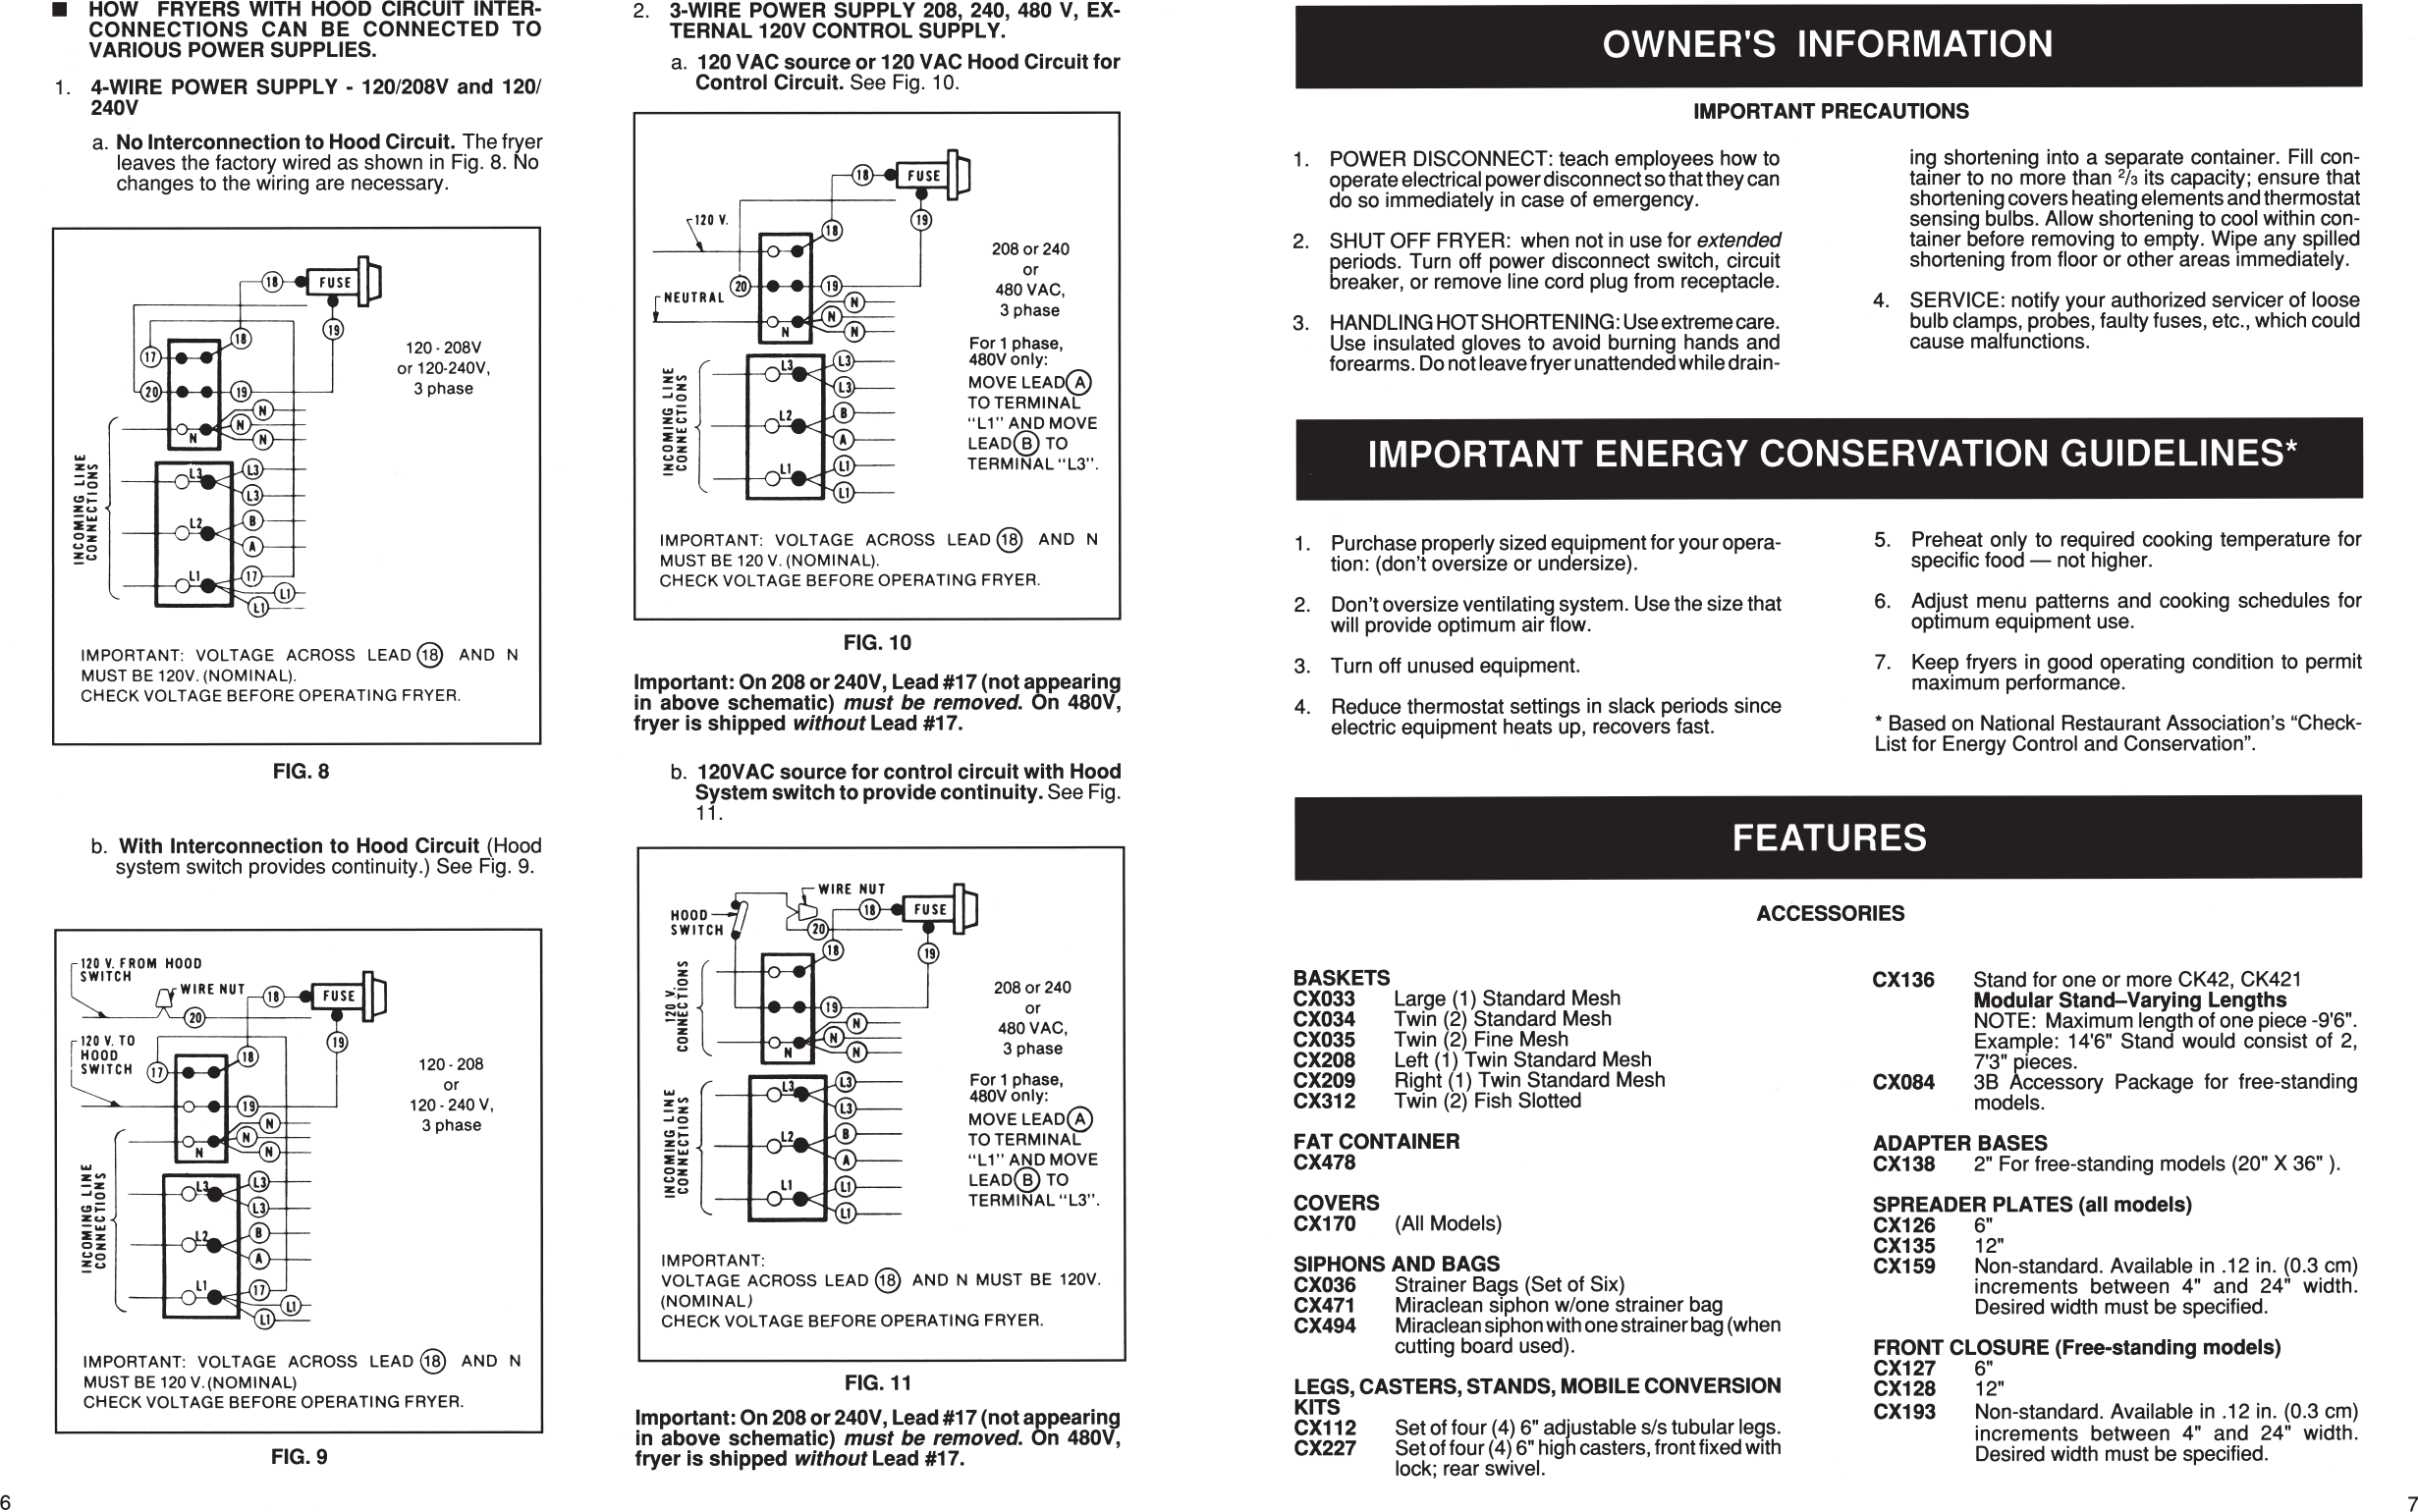 Page 7 of 12 - Hobart Hobart-Corp-Fryer-Ck40-Users-Manual- F27400  Hobart-corp-fryer-ck40-users-manual